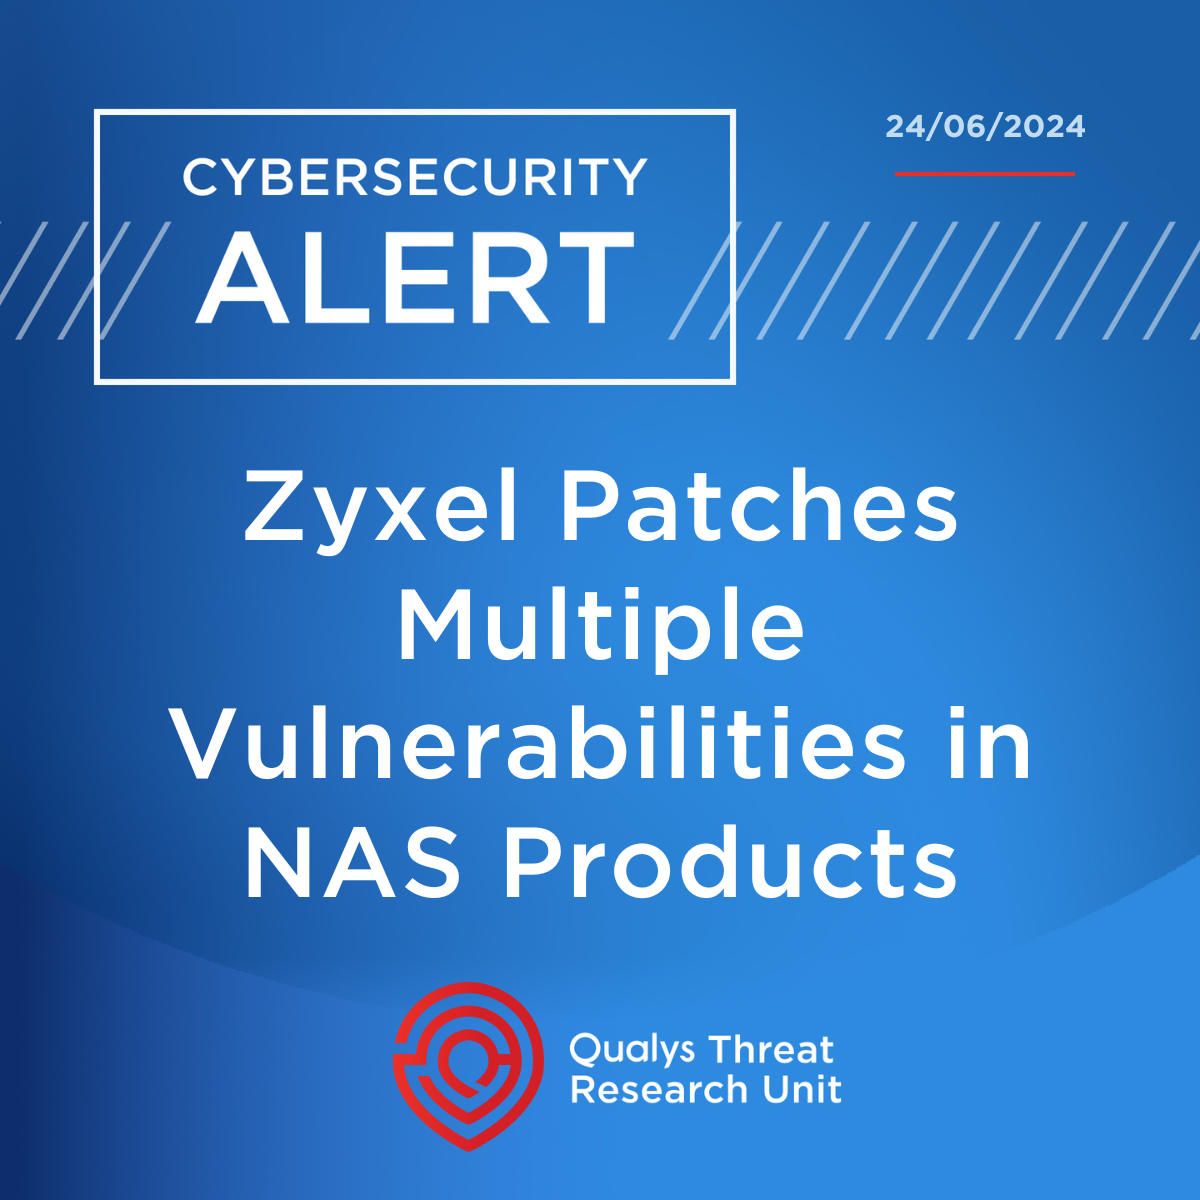 Zyxel Patches Multiple Vulnerabilities in NAS Products